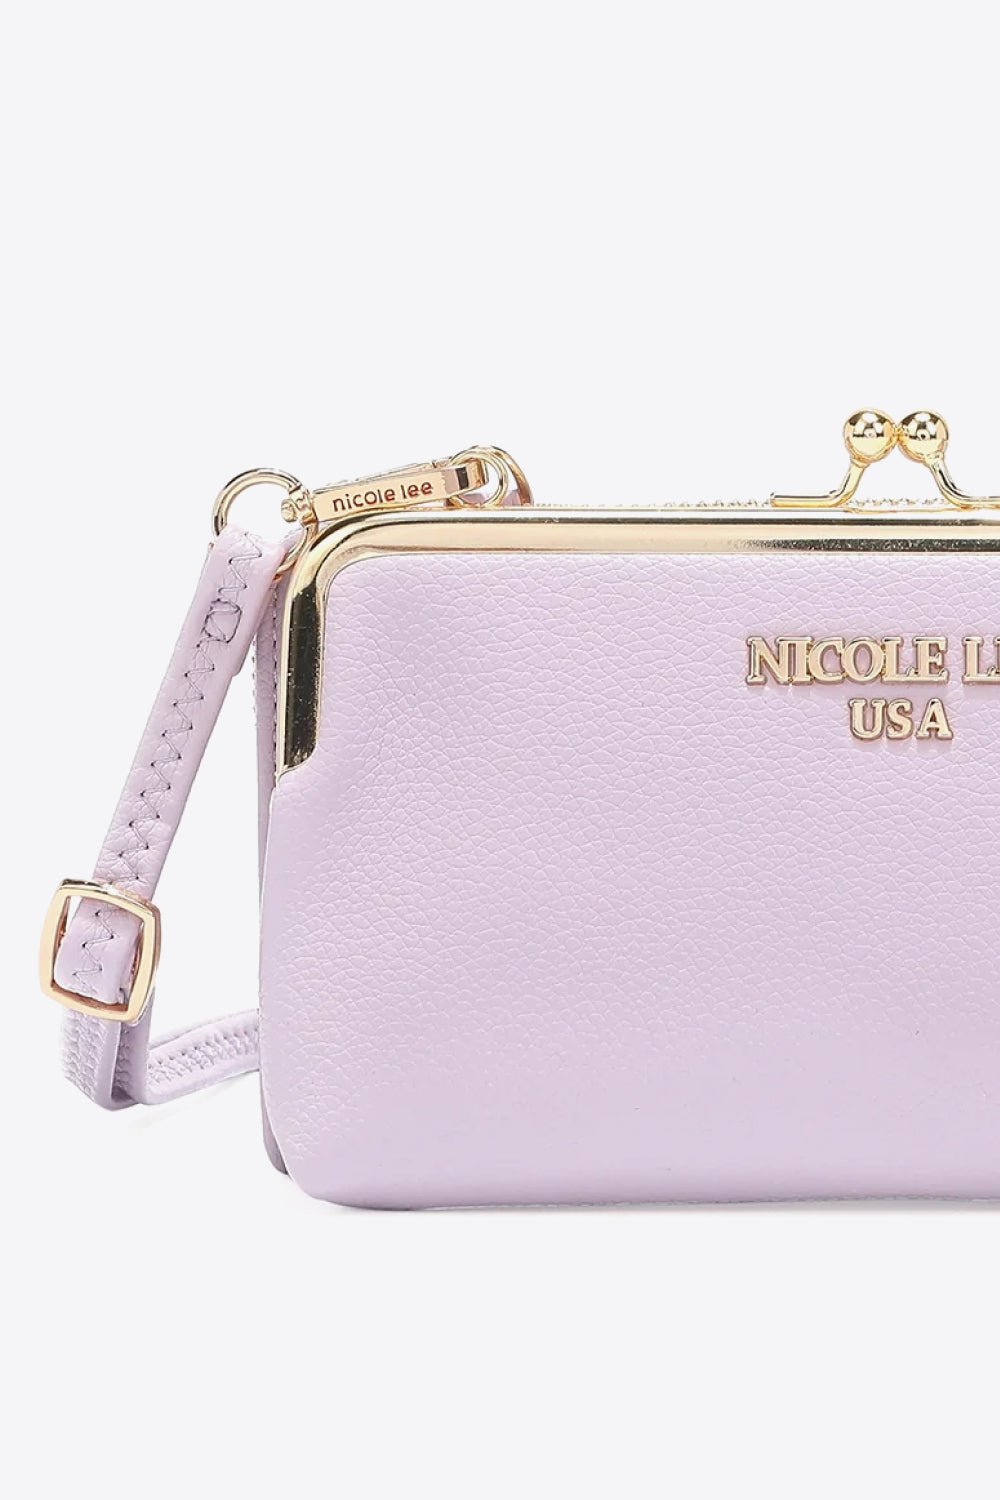 Nicole Lee USA Night Out Crossbody Wallet Purse - Guy Christopher